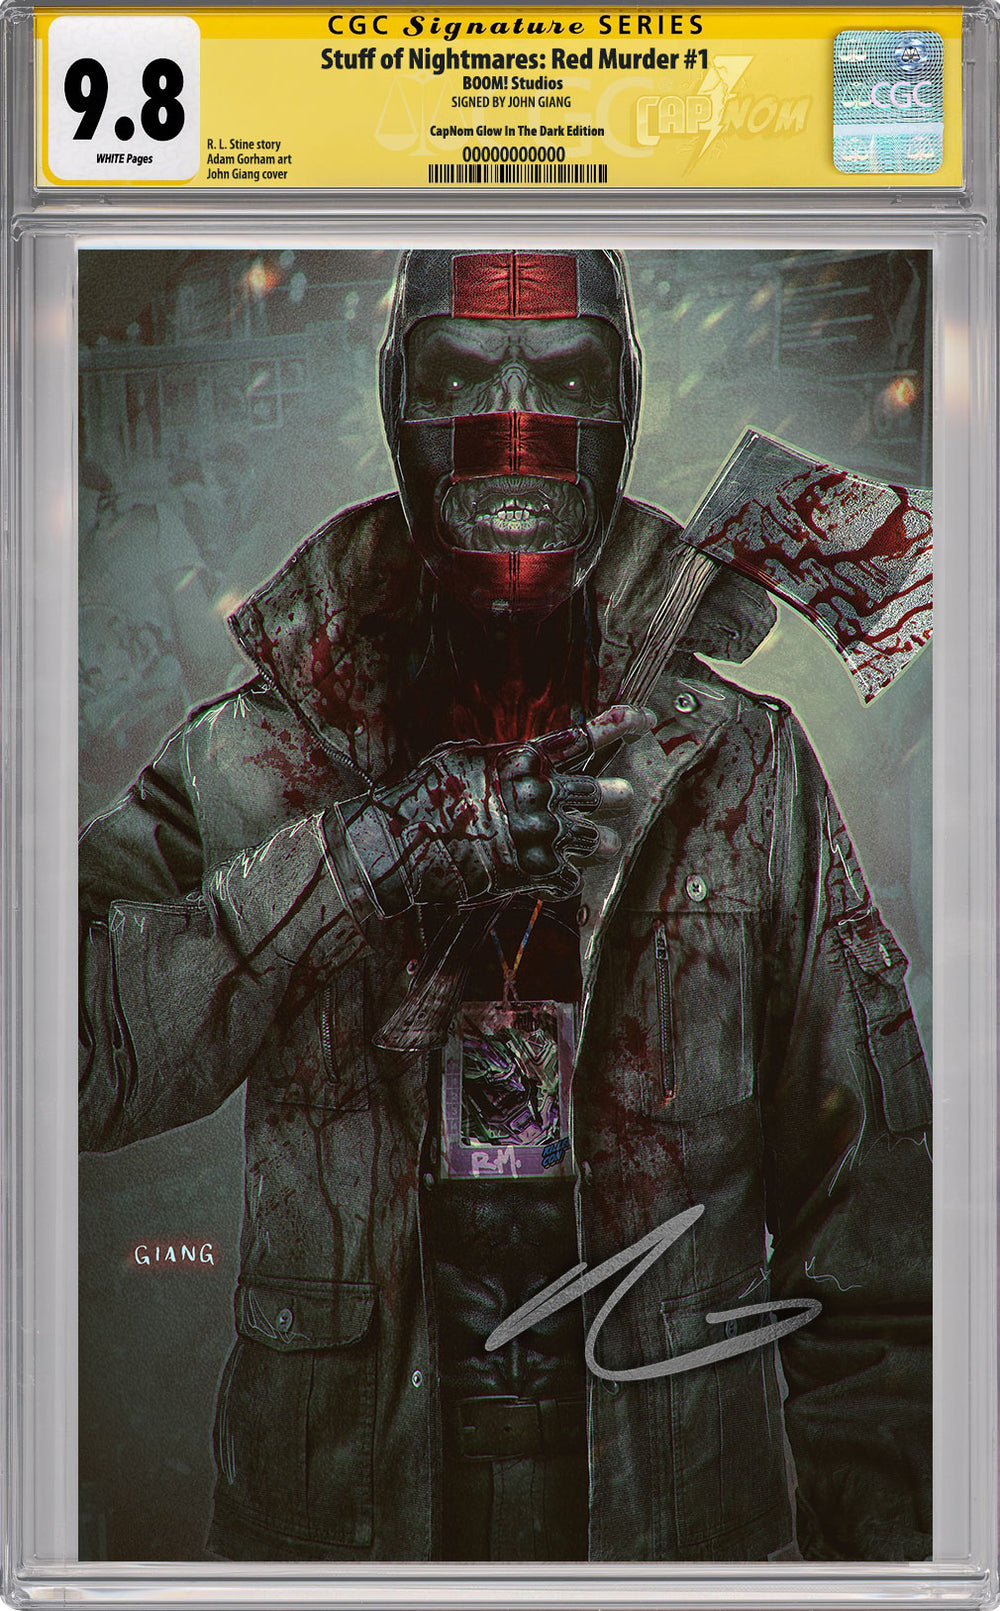 Stuff of Nightmares: Red Murder #1 John Giang NYCC Glow In The Dark Cover CGC SS 9.8